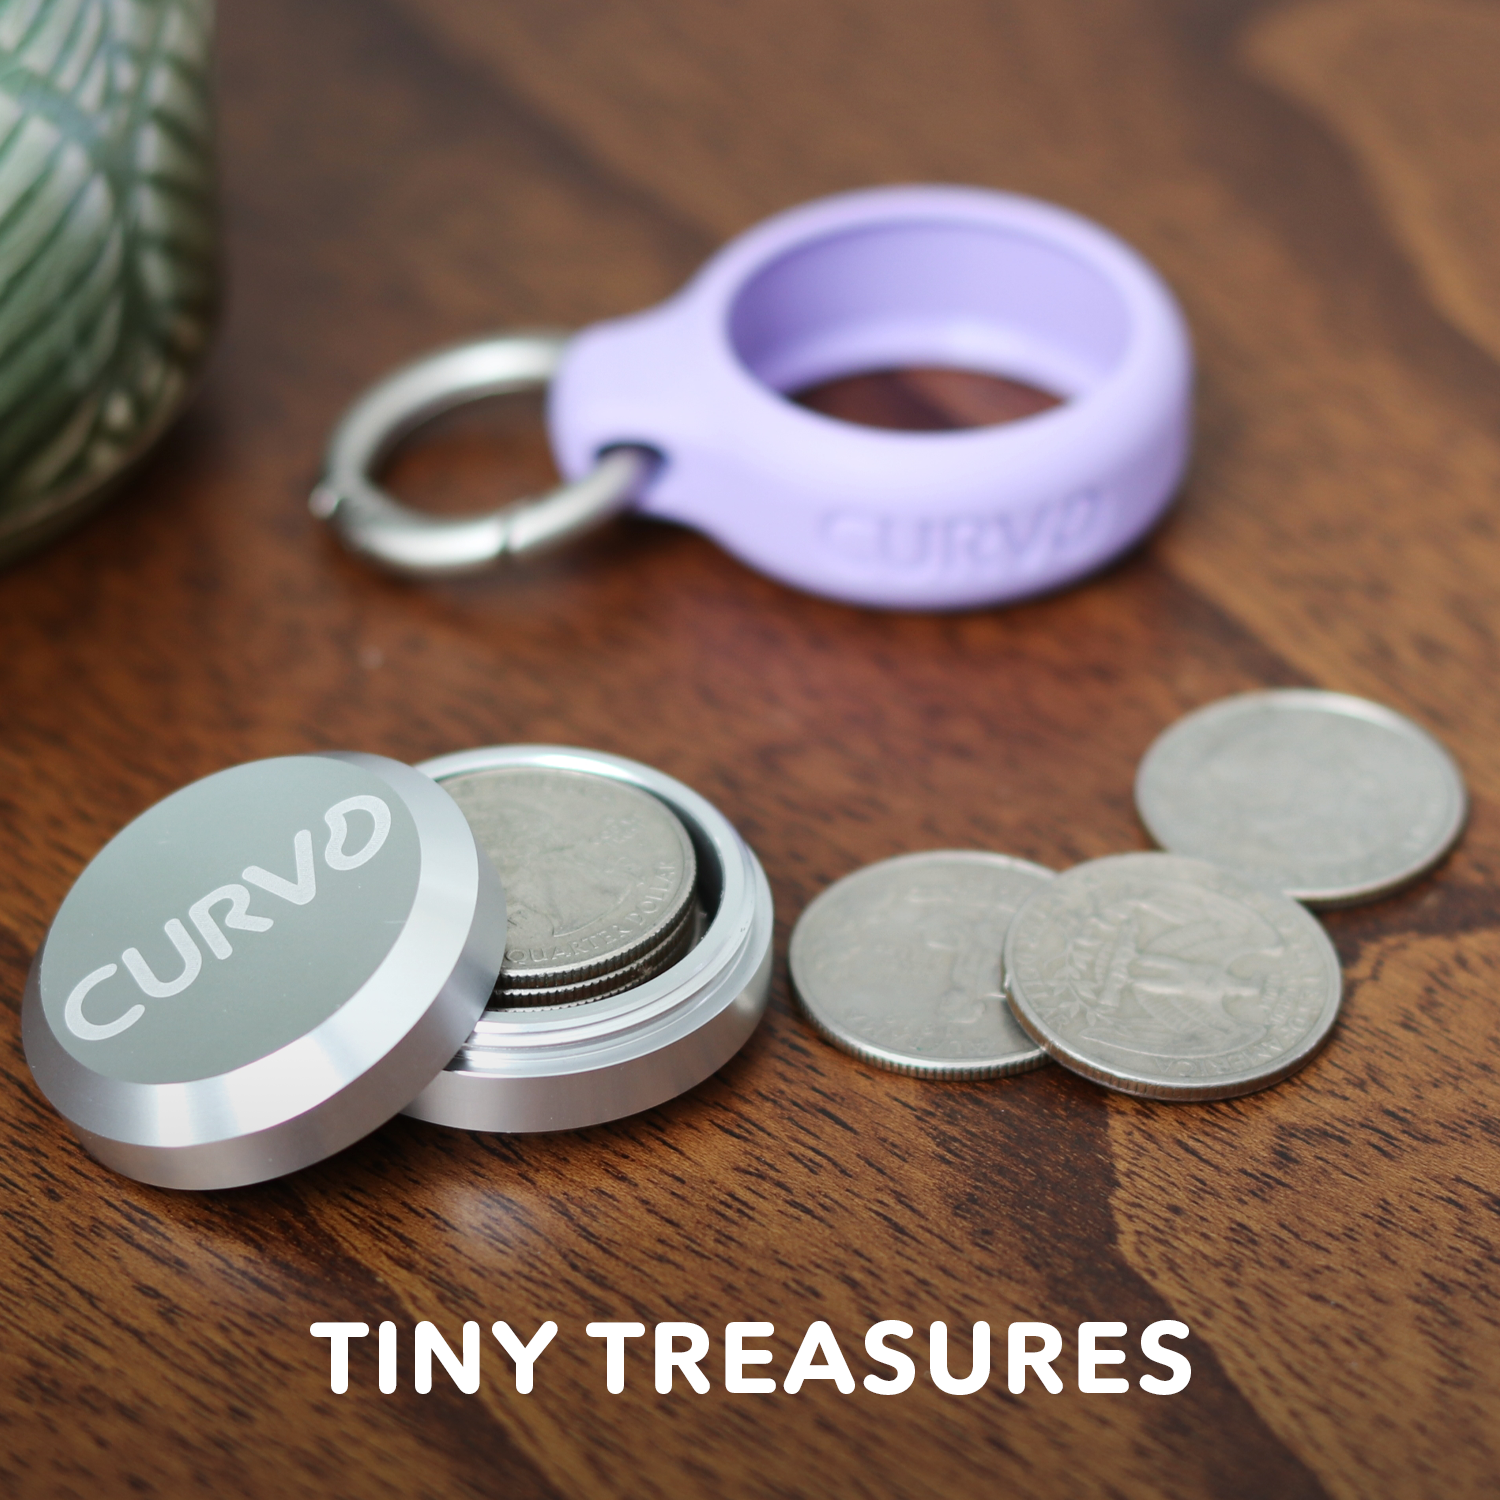 A small round metal container with the word "CURV3" on the lid is open, revealing coins inside. Next to it are a few coins and a purple ring with "CURV3" inscribed, all on a wooden surface. The **Premium Carrying Case Plus Clip** sits beside them. The text **"TINY TREASURES"** from **CURVD Earplugs** is at the bottom of the image.